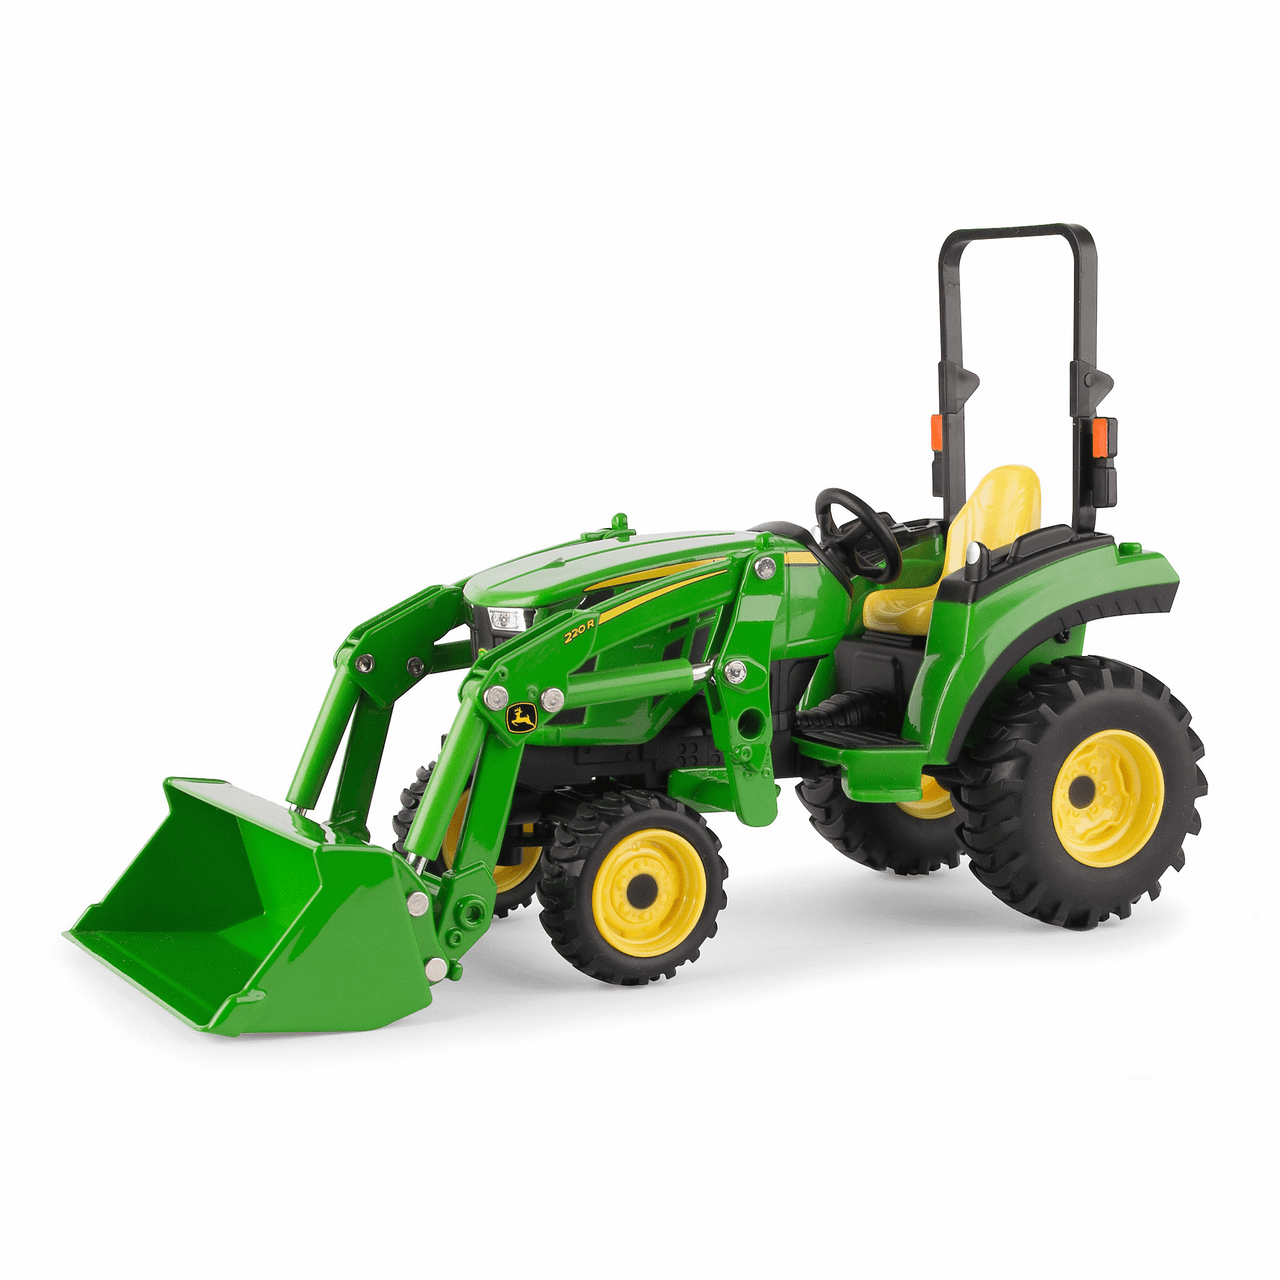 1:16 John Deere 2038R Tractor with Loader Replica Toy